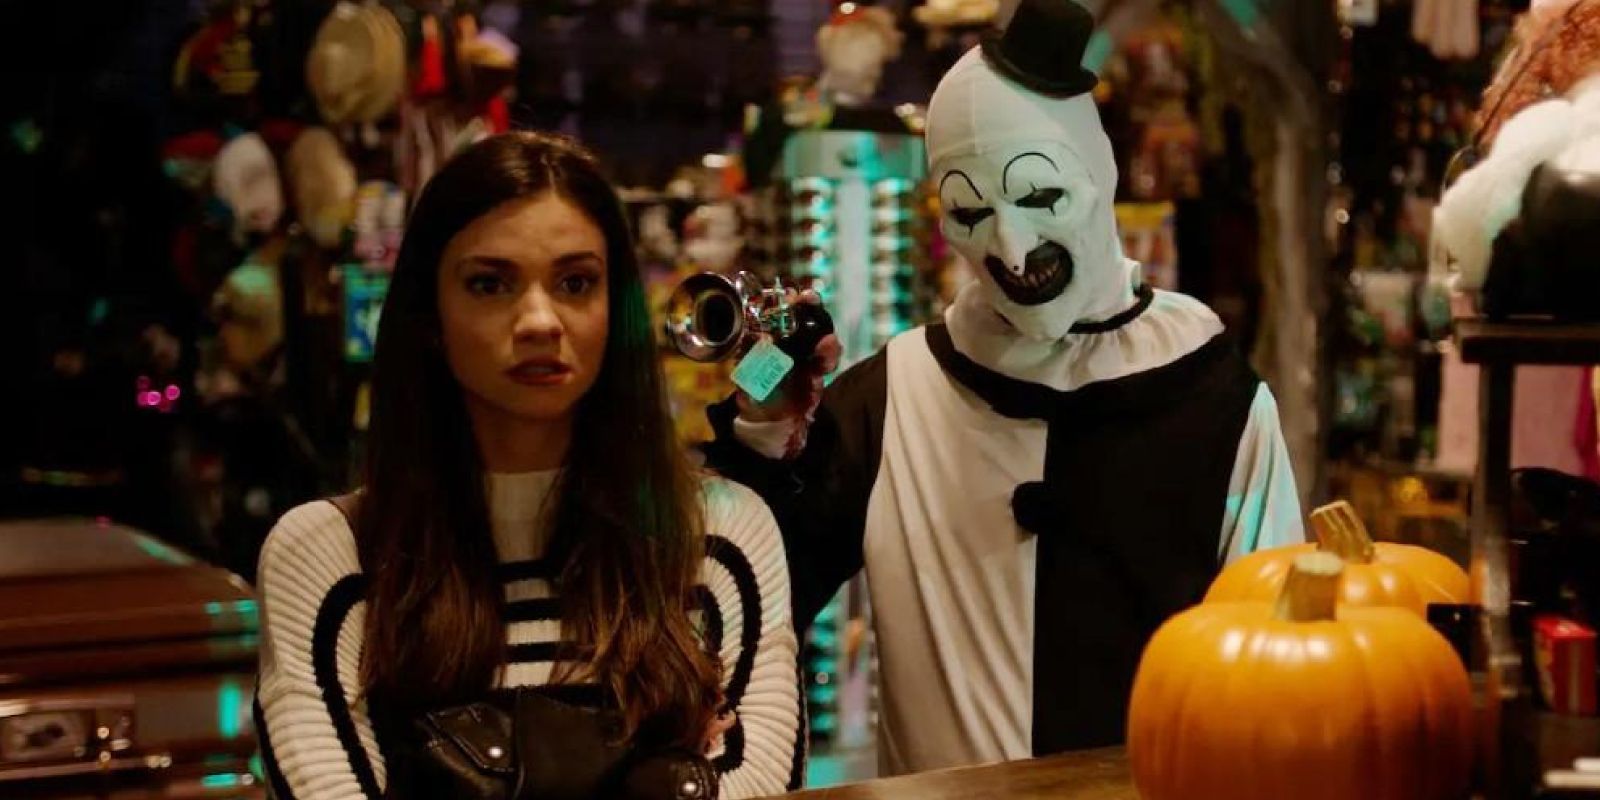 Sienna and Art the Clown in the Halloween Store